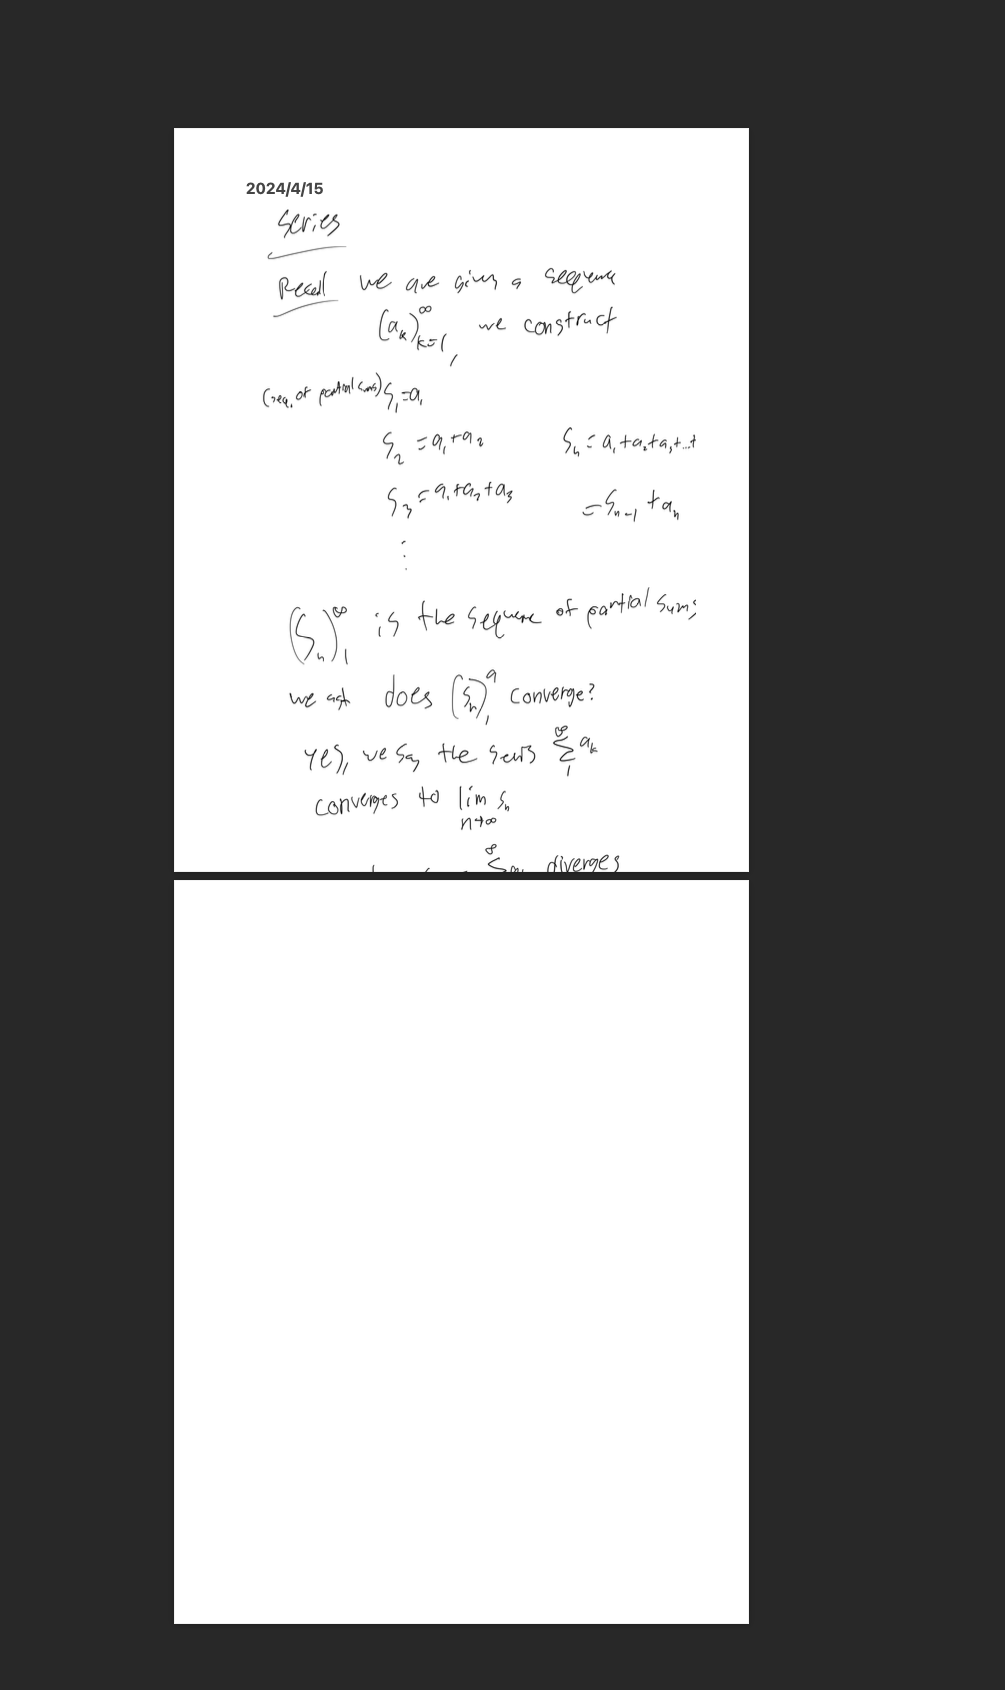 screenshot of PDF, first page has writing, cut off by bottom of first page. Second page is blank.